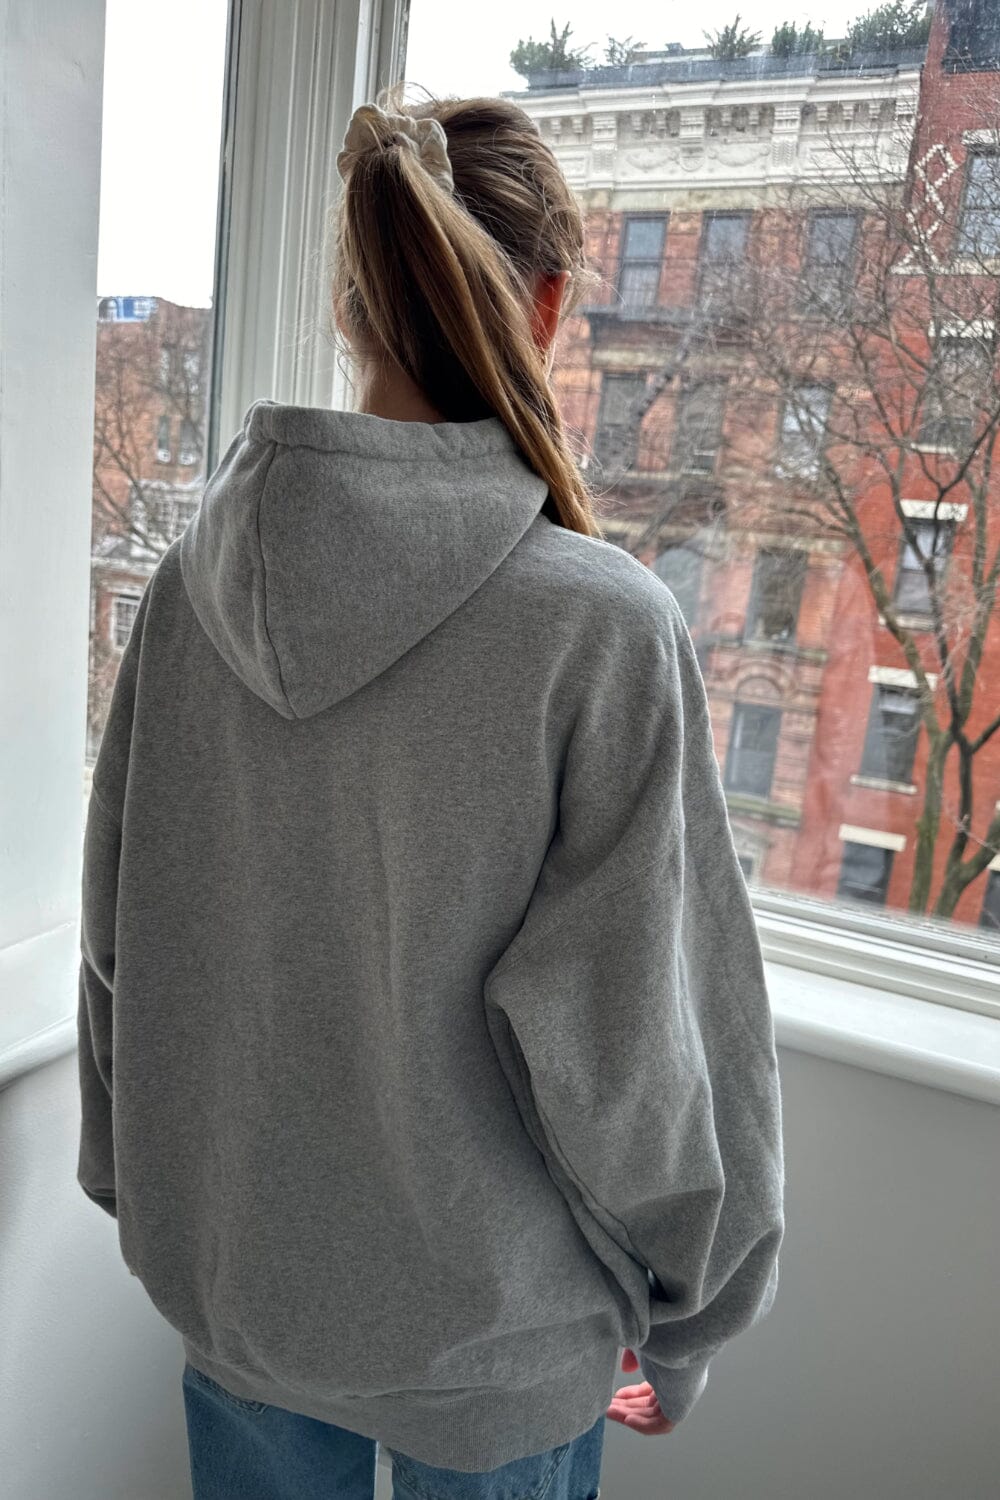 Brandy Melville Christy Hoodie Black - $30 (25% Off Retail) - From